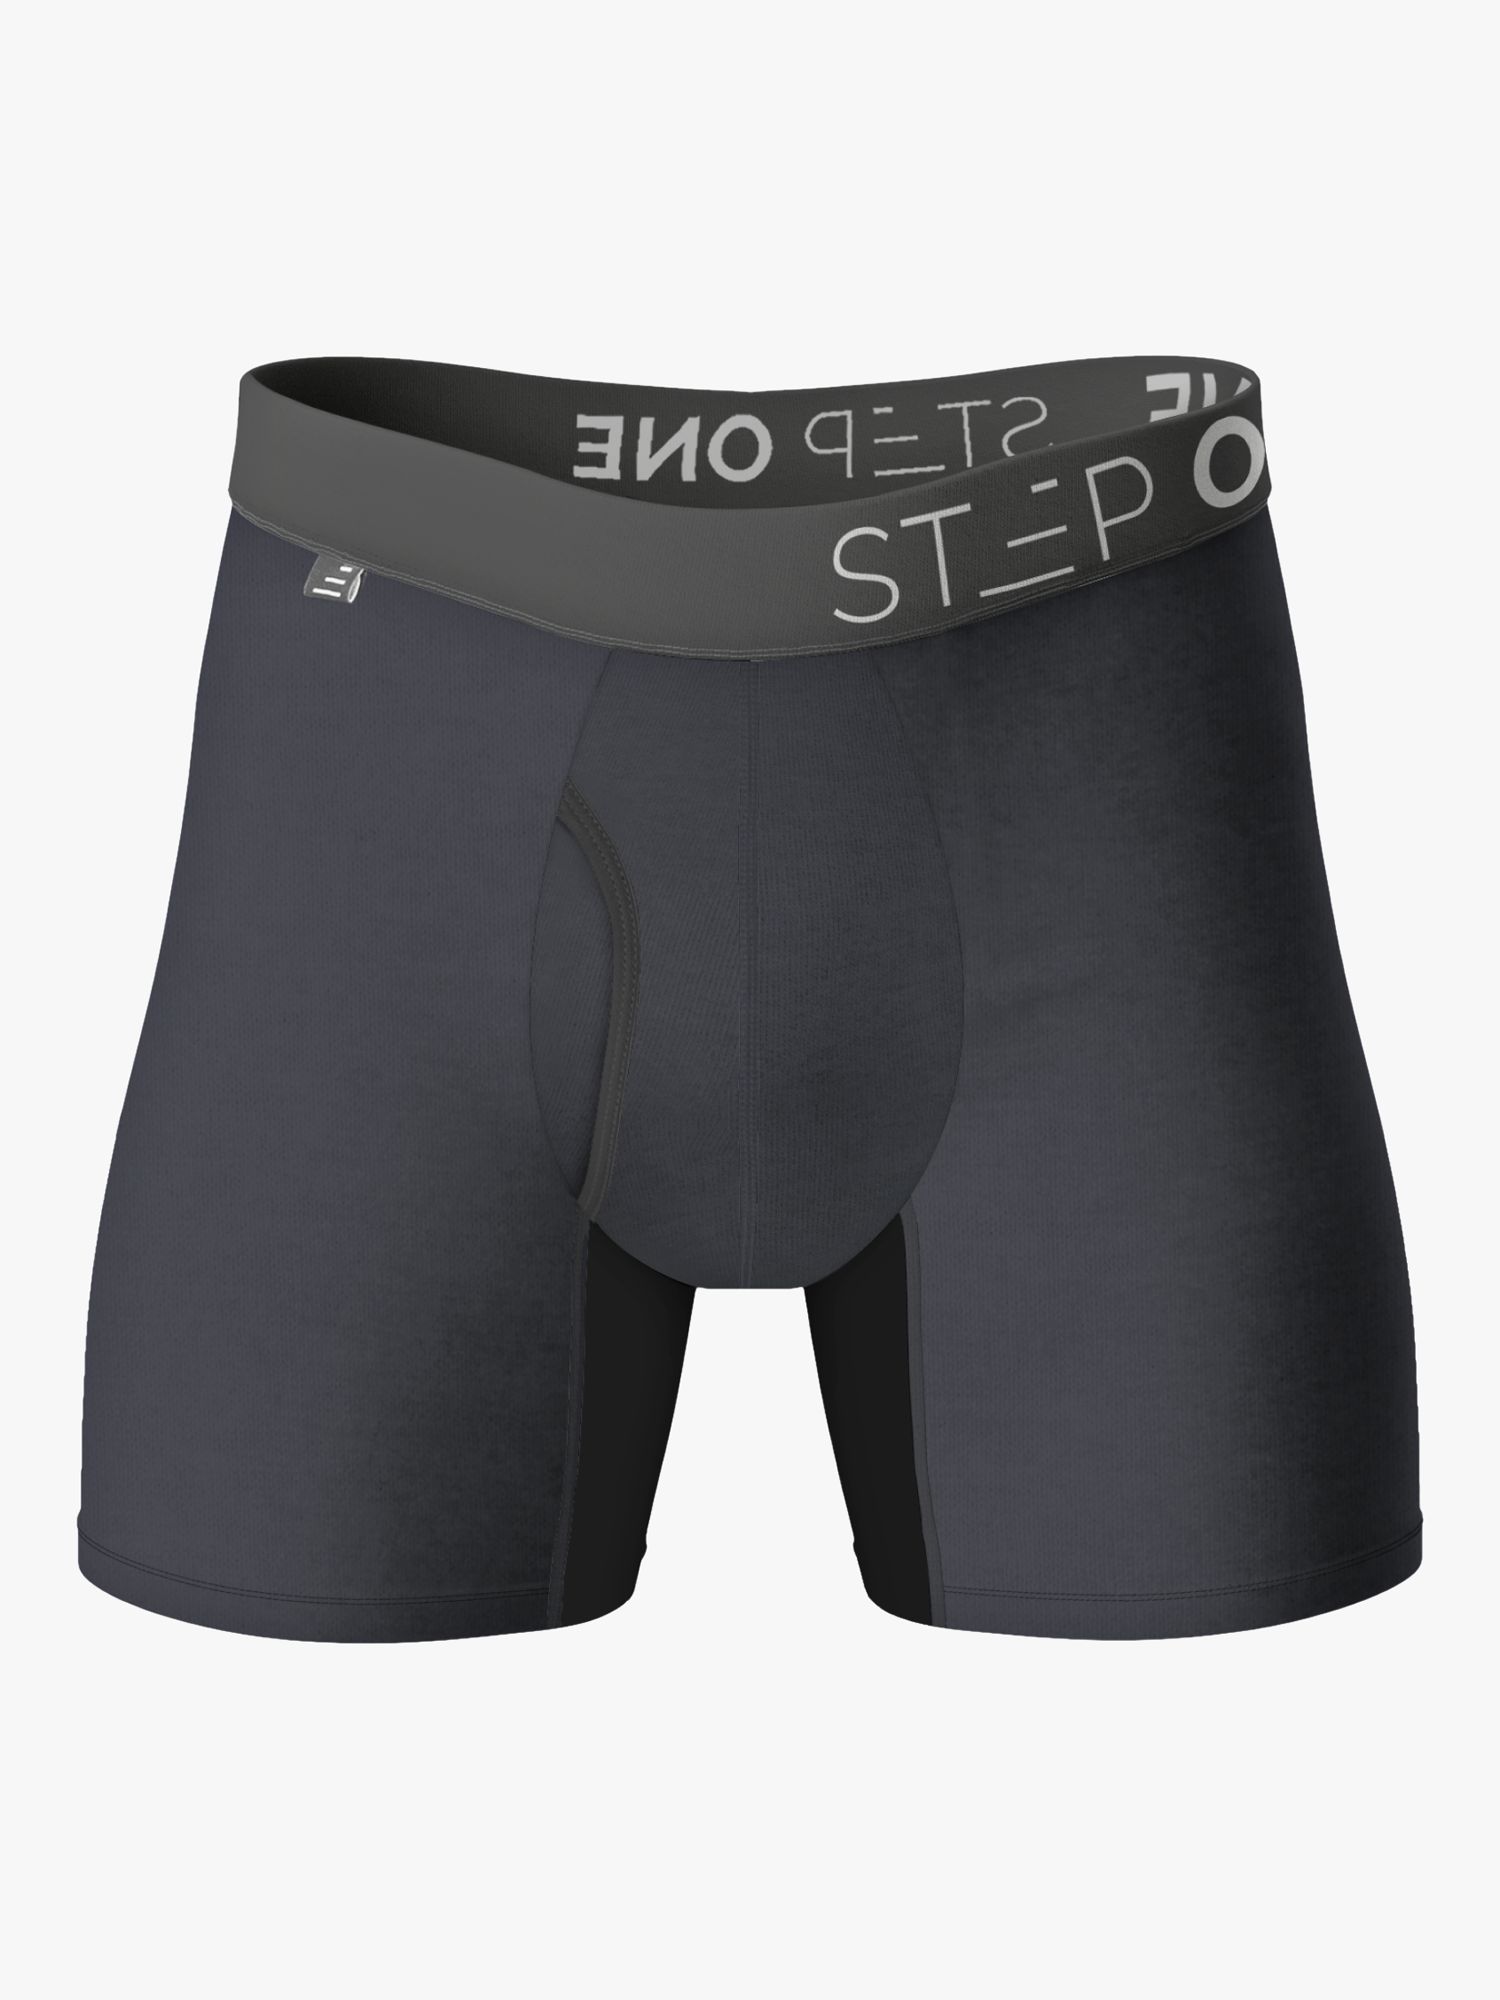 Step One Bamboo Boxer Briefs With Fly, Smoking Guns, XXXL